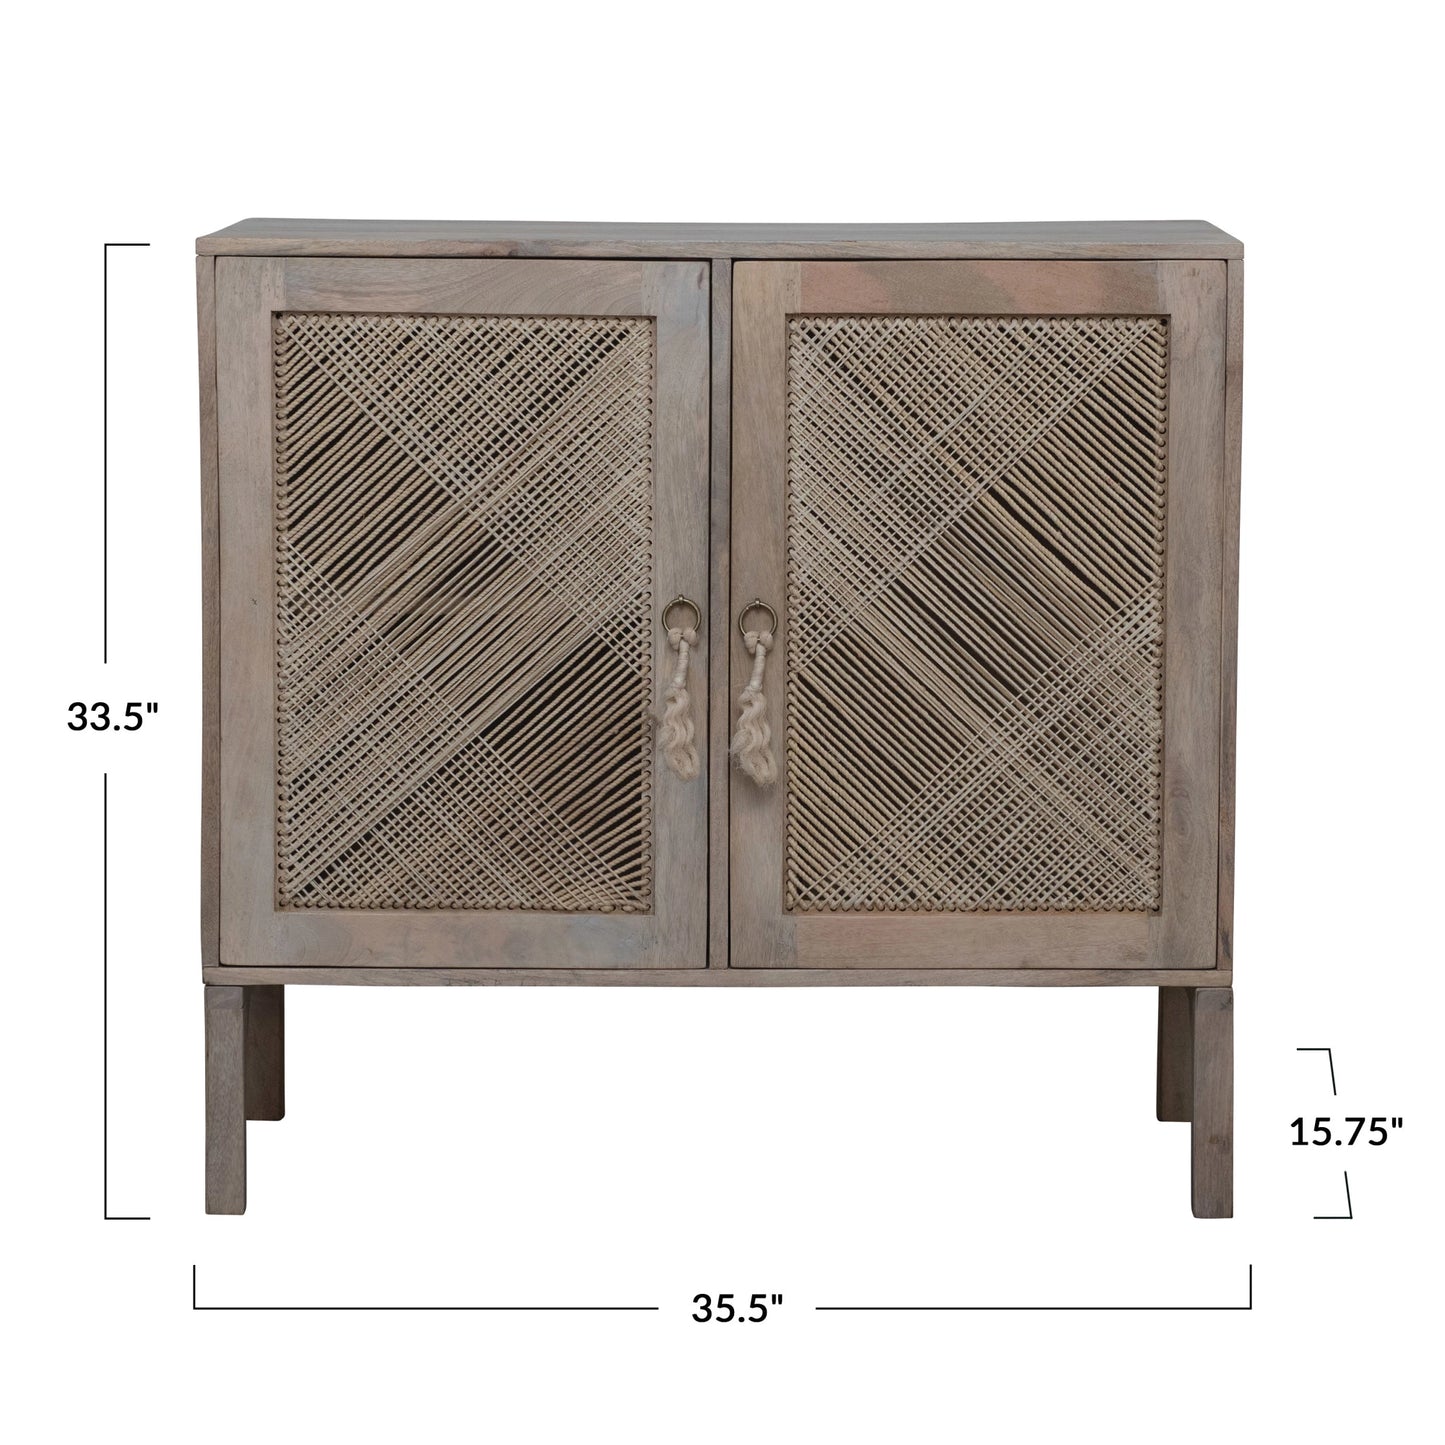 Mango Wood Console with Woven Rope Doors